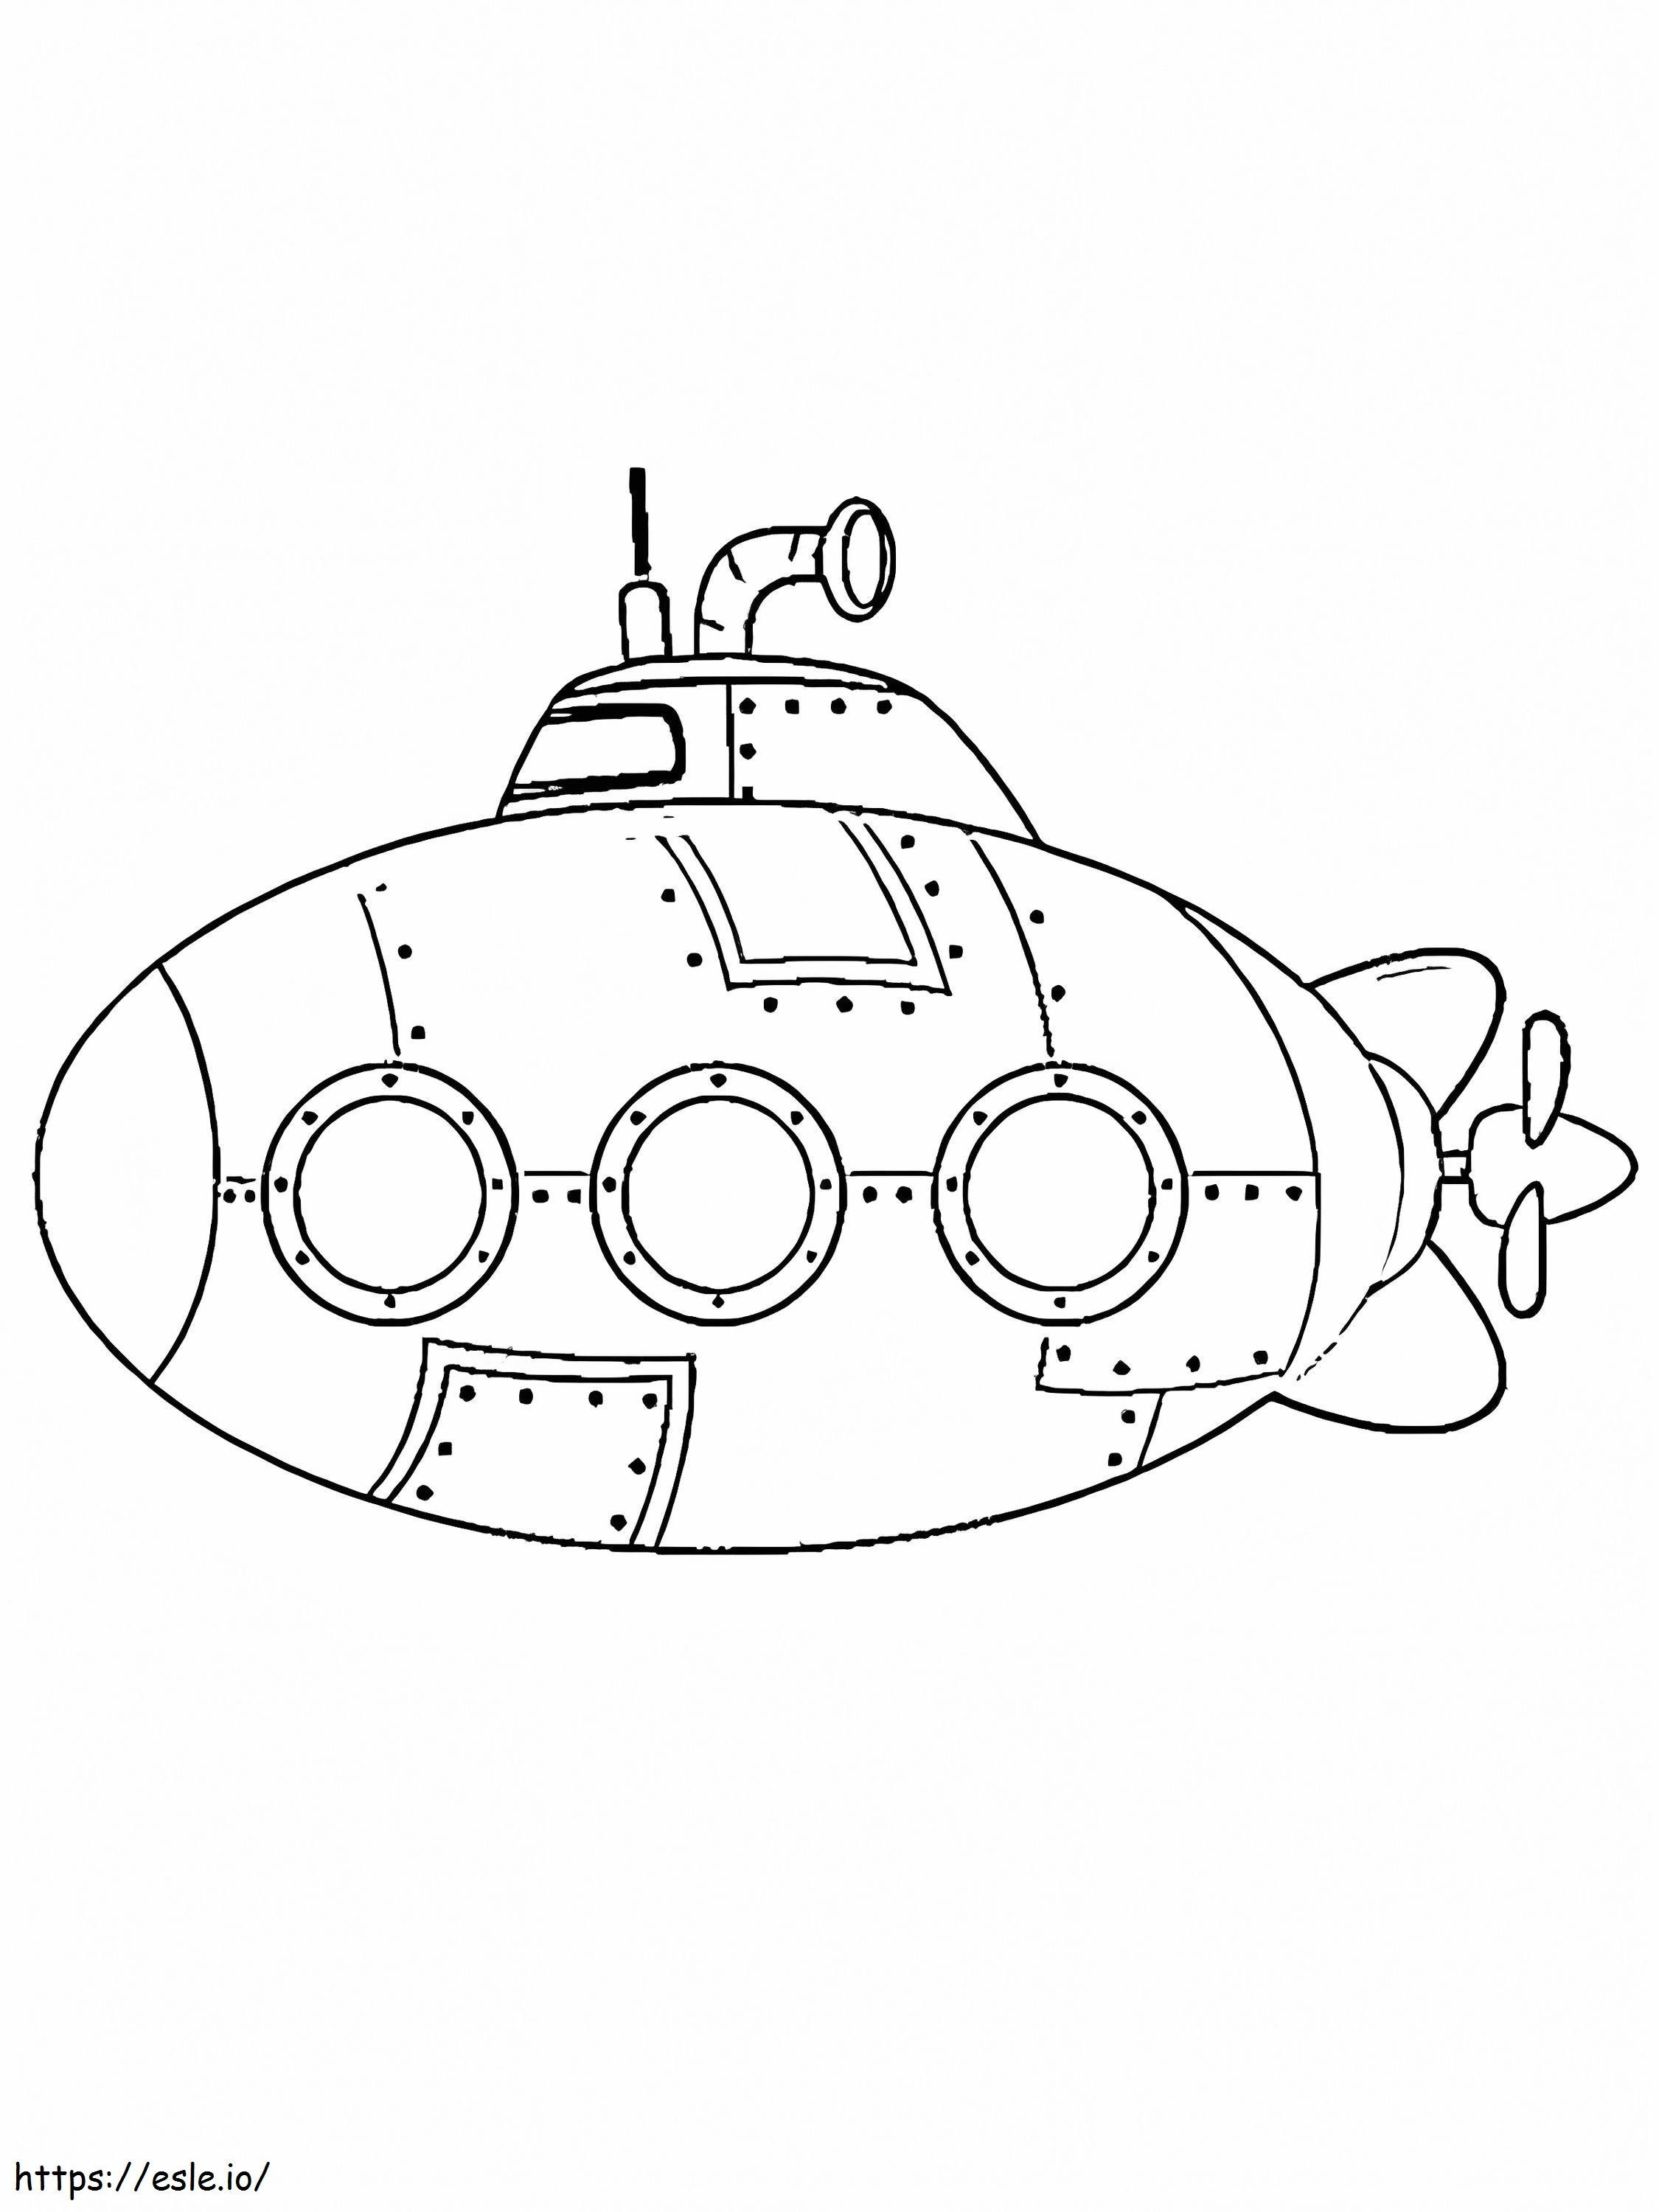 Submarine 15 coloring page